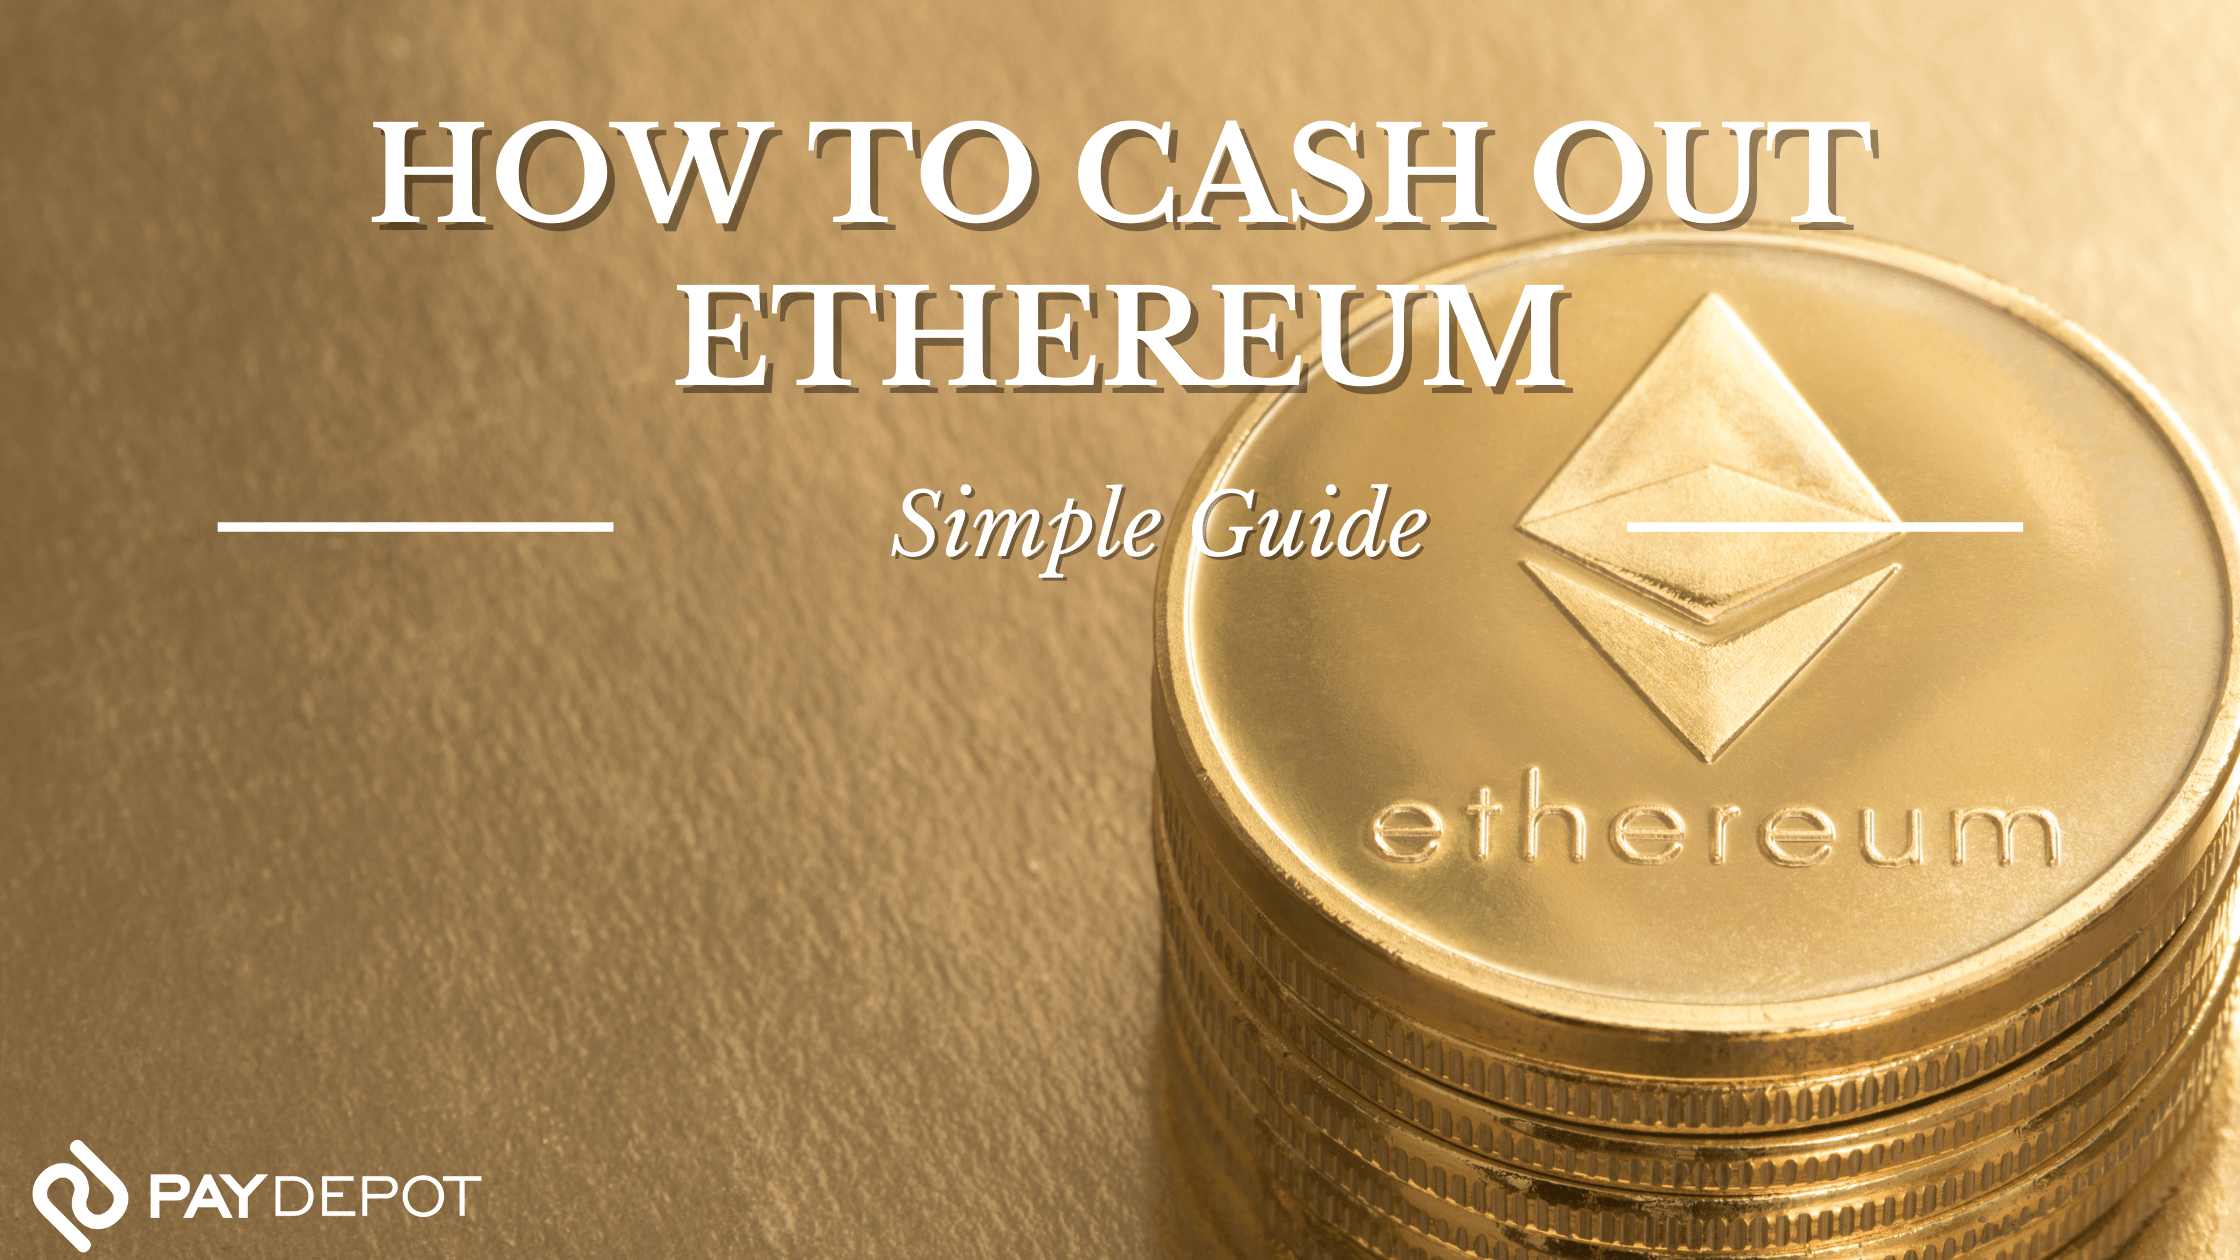 Sell Ethereum ETH the easy way